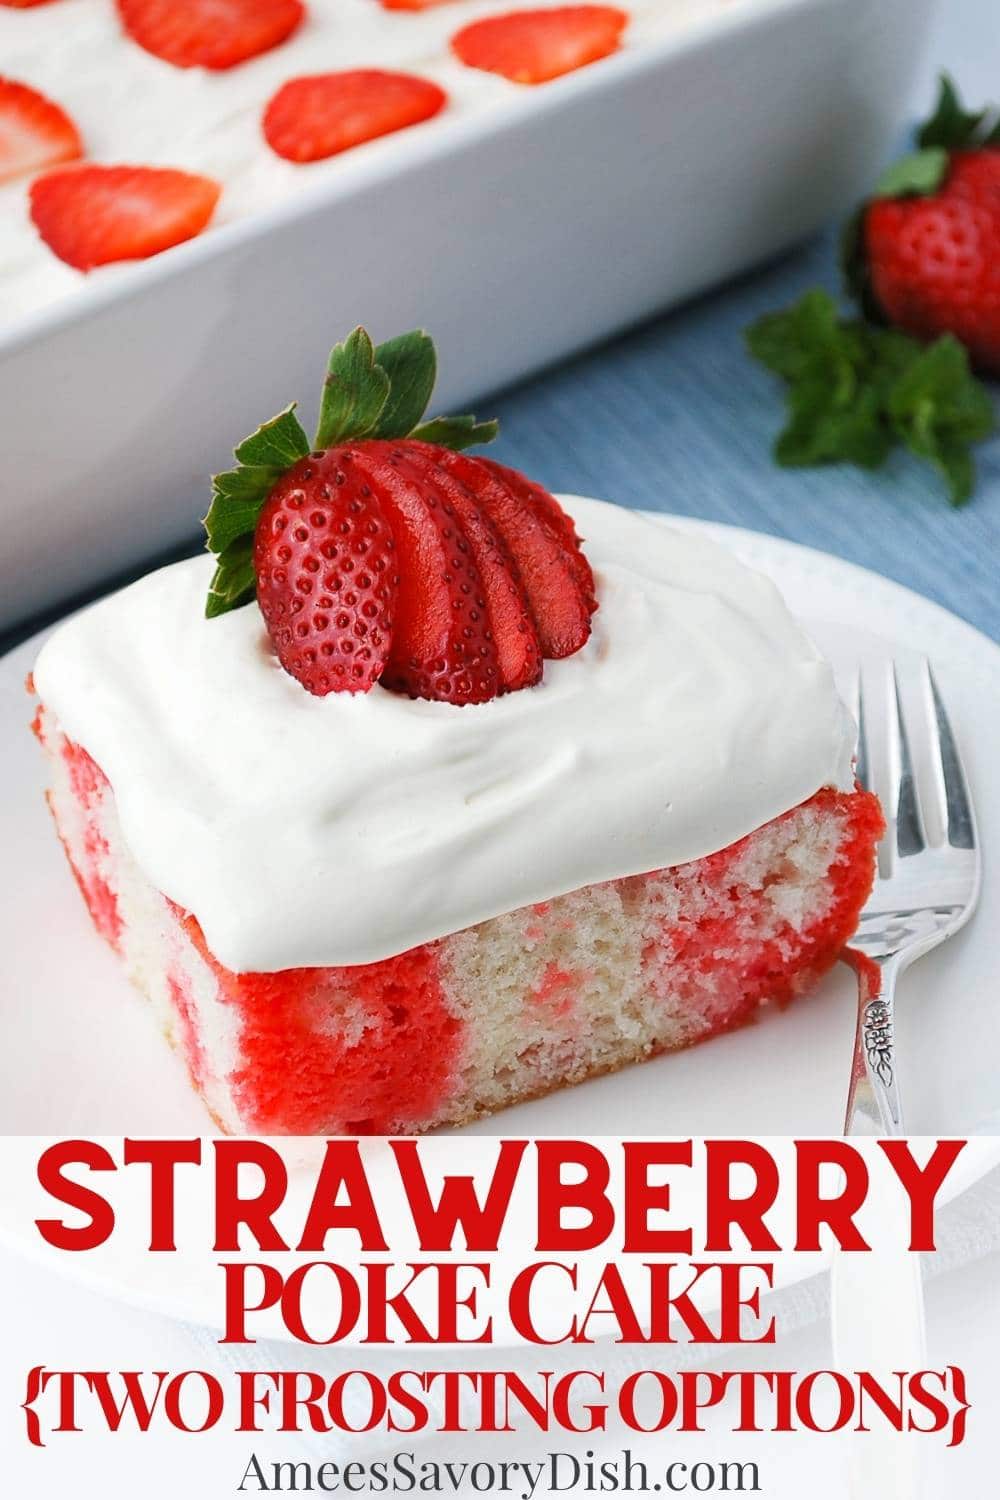 Revamp a boring box of white cake mix into something truly special -an Old-Fashioned Jello Cake! Learn how to make a strawberry jello-filled poke cake with whipped pudding frosting and fresh strawberries. via @Ameessavorydish